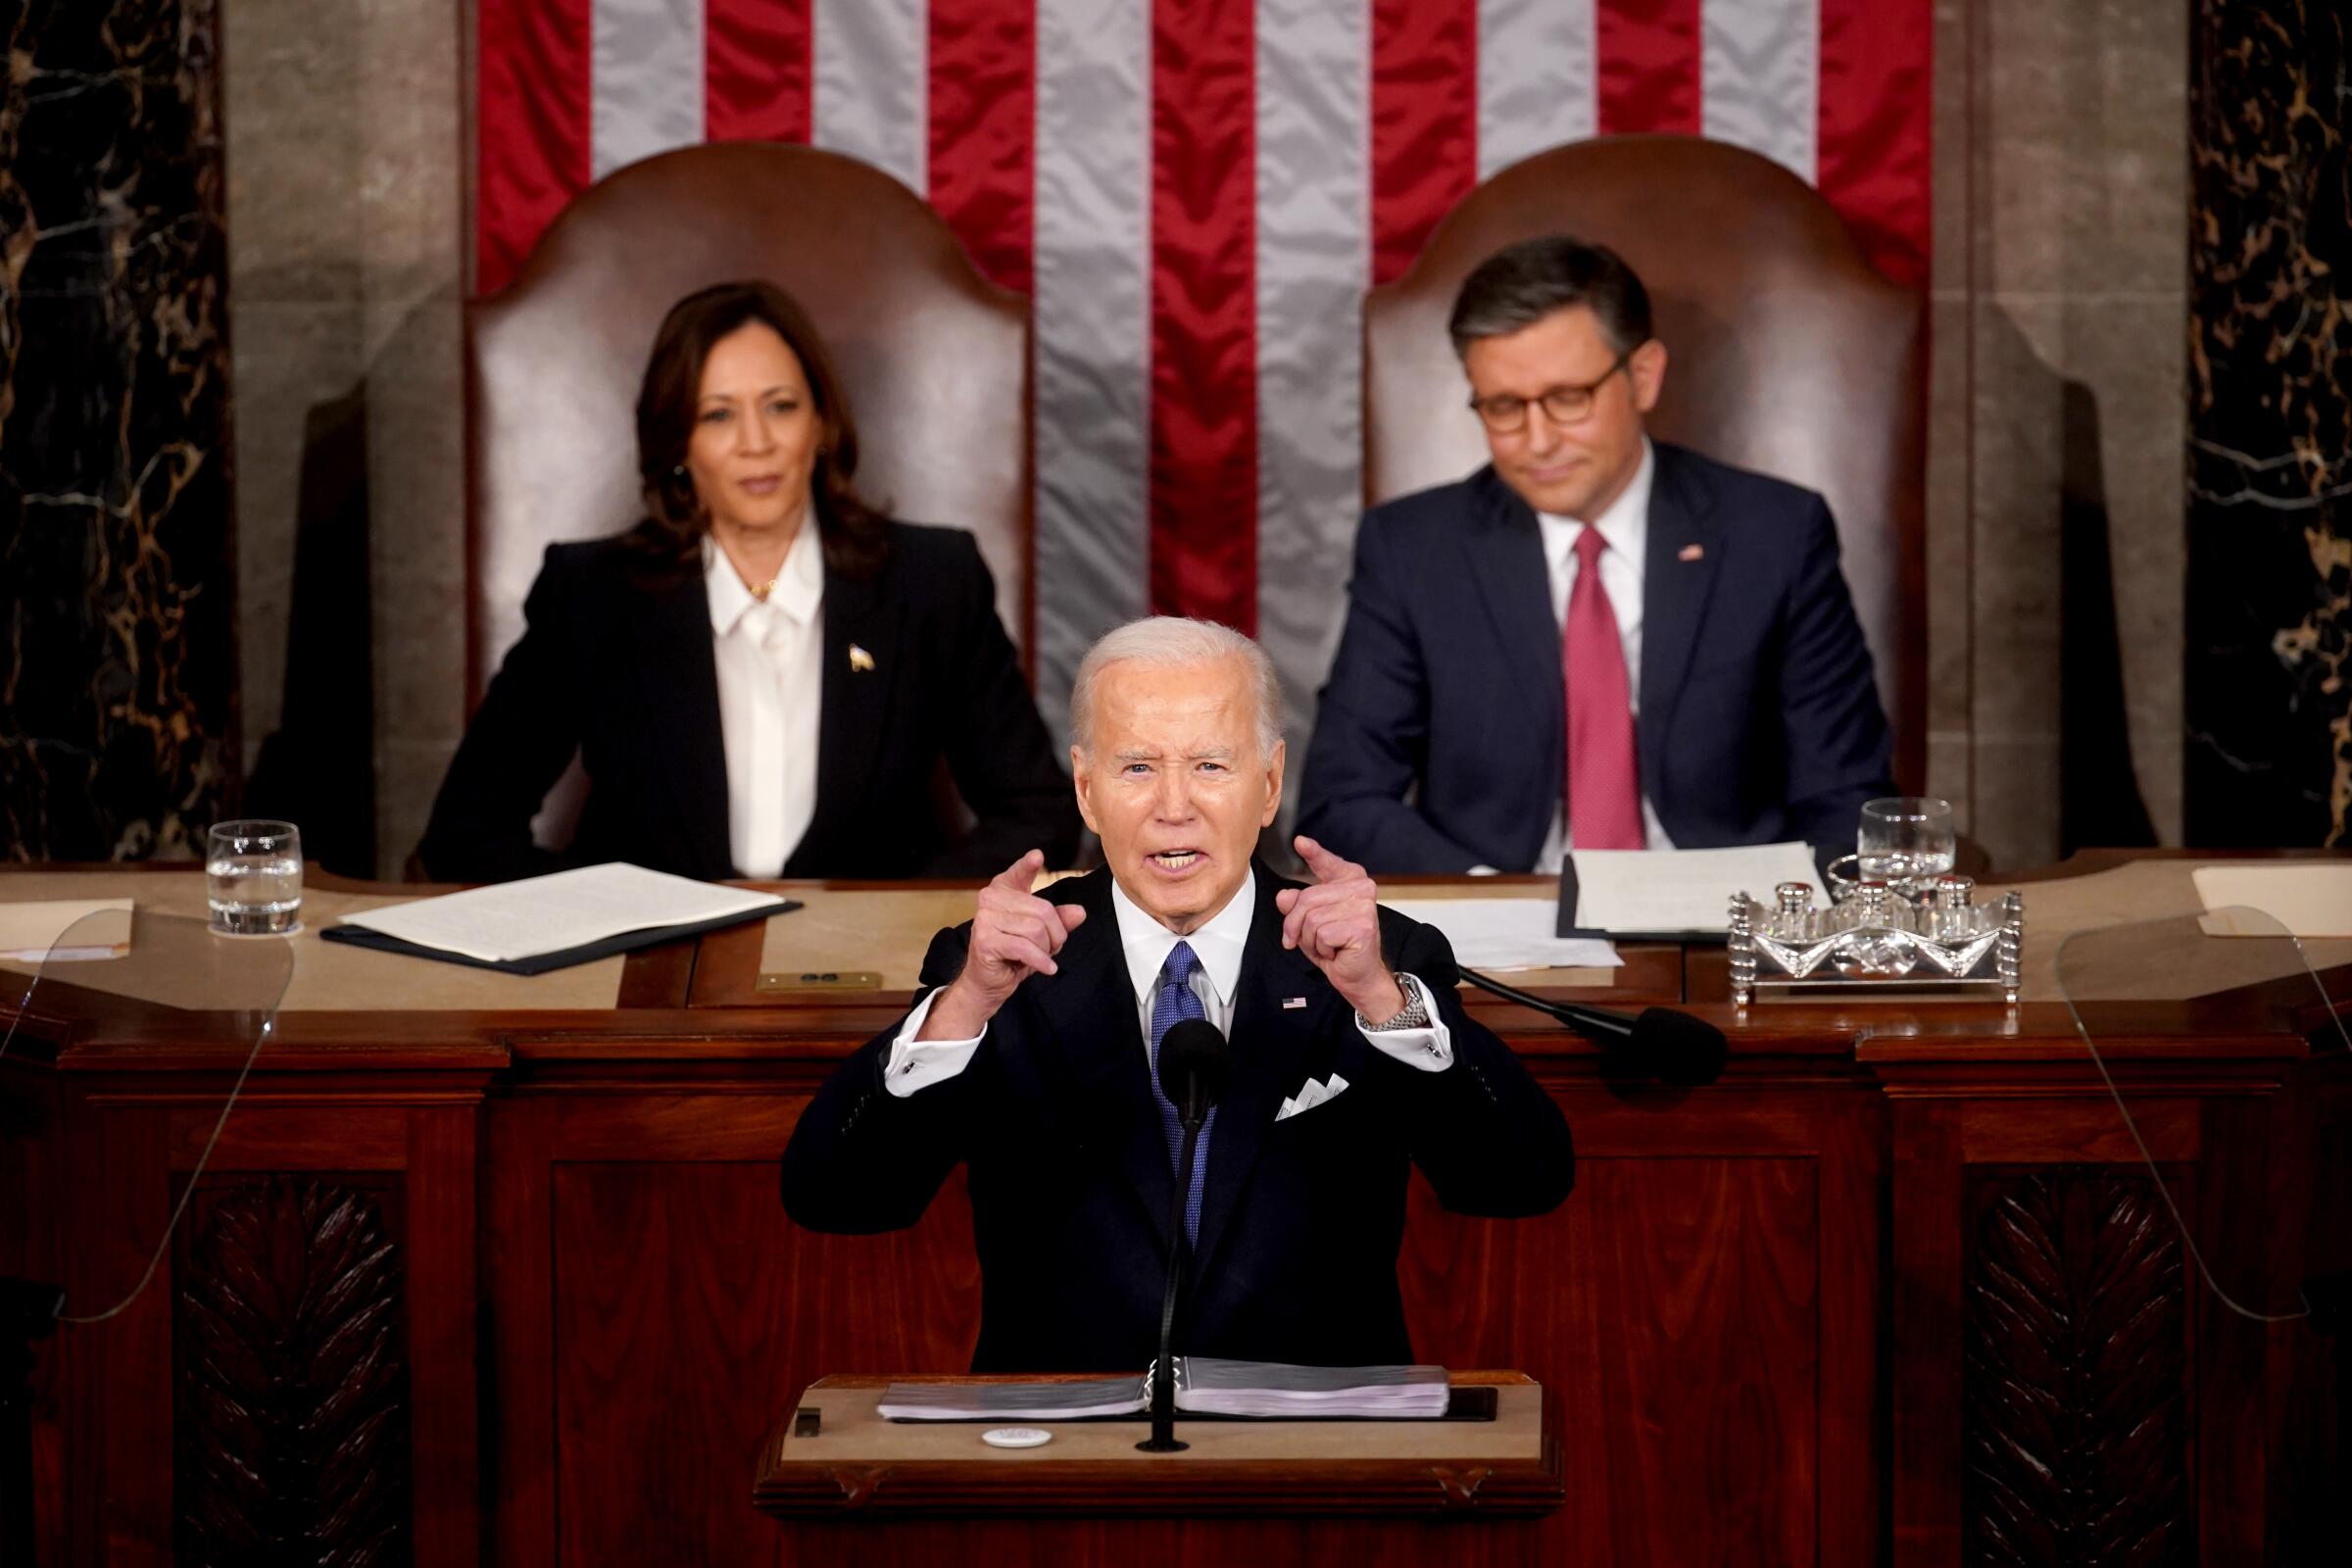 President Biden gestures while speaking in Congress; Vice President Harris and Speaker Mike Johnson sit above and behind him